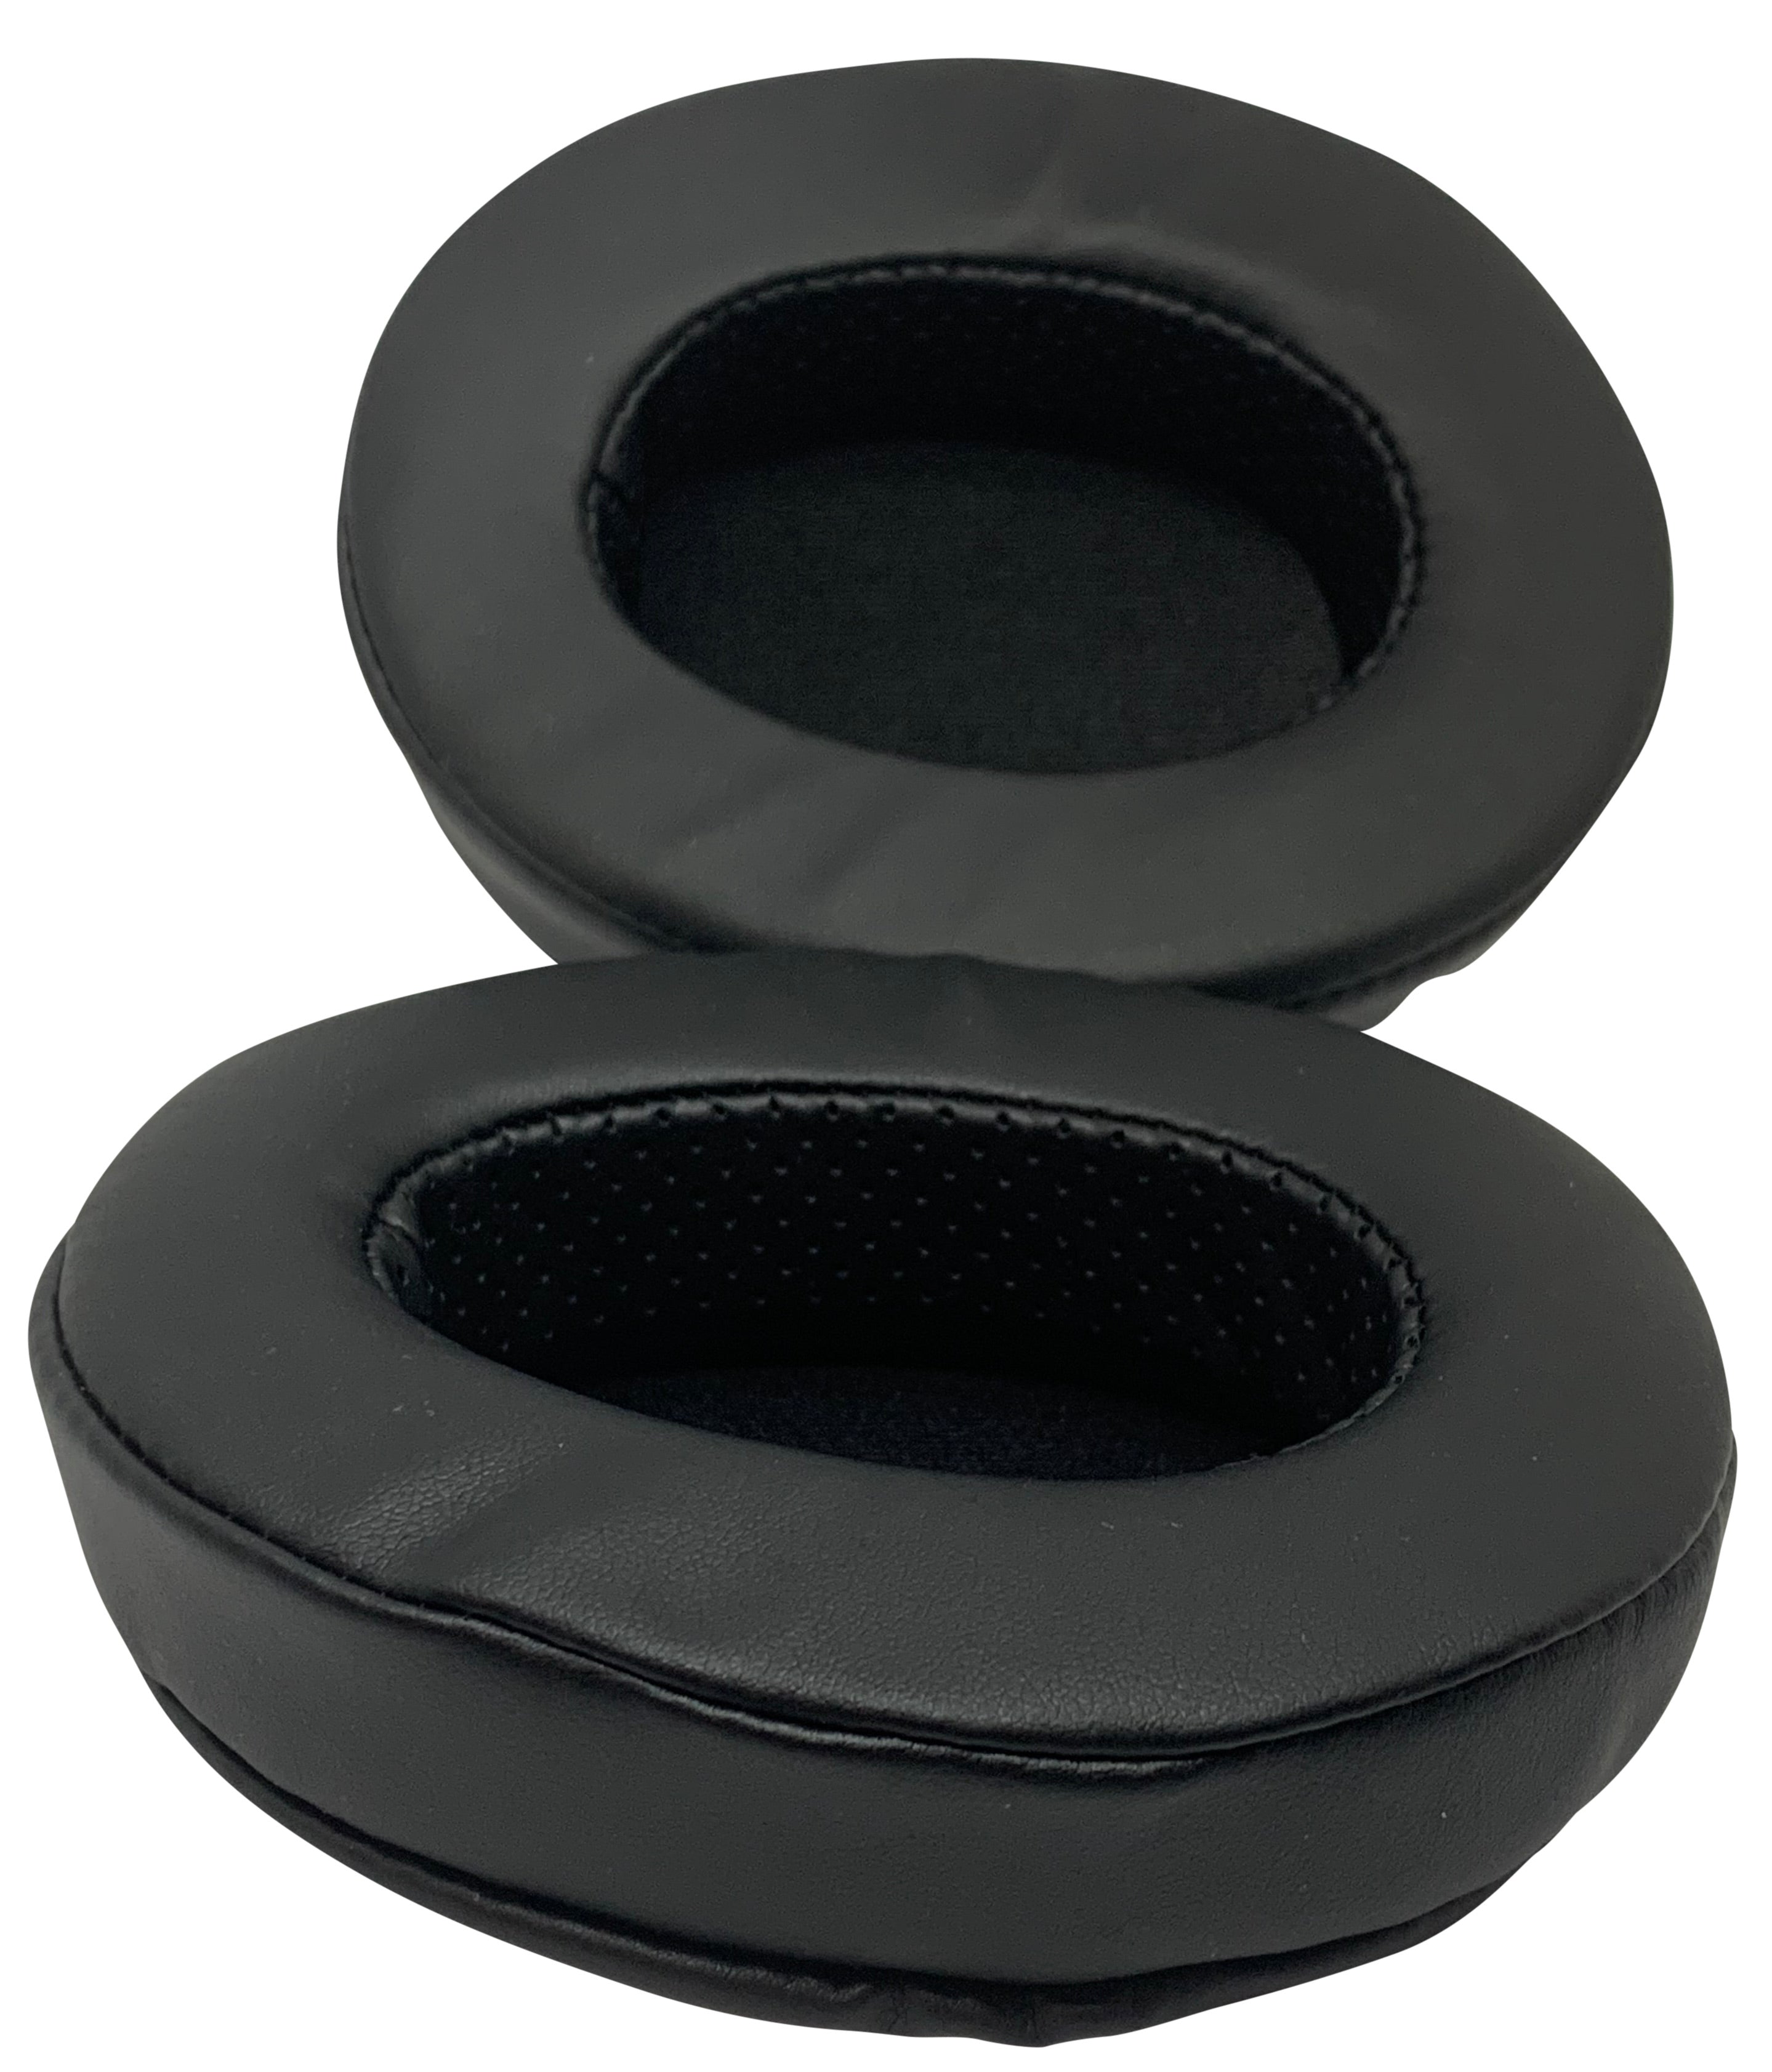 CentralSound Premium Replacement Ear Pad Cushions for SteelSeries Arctis Gaming Headsets - CentralSound